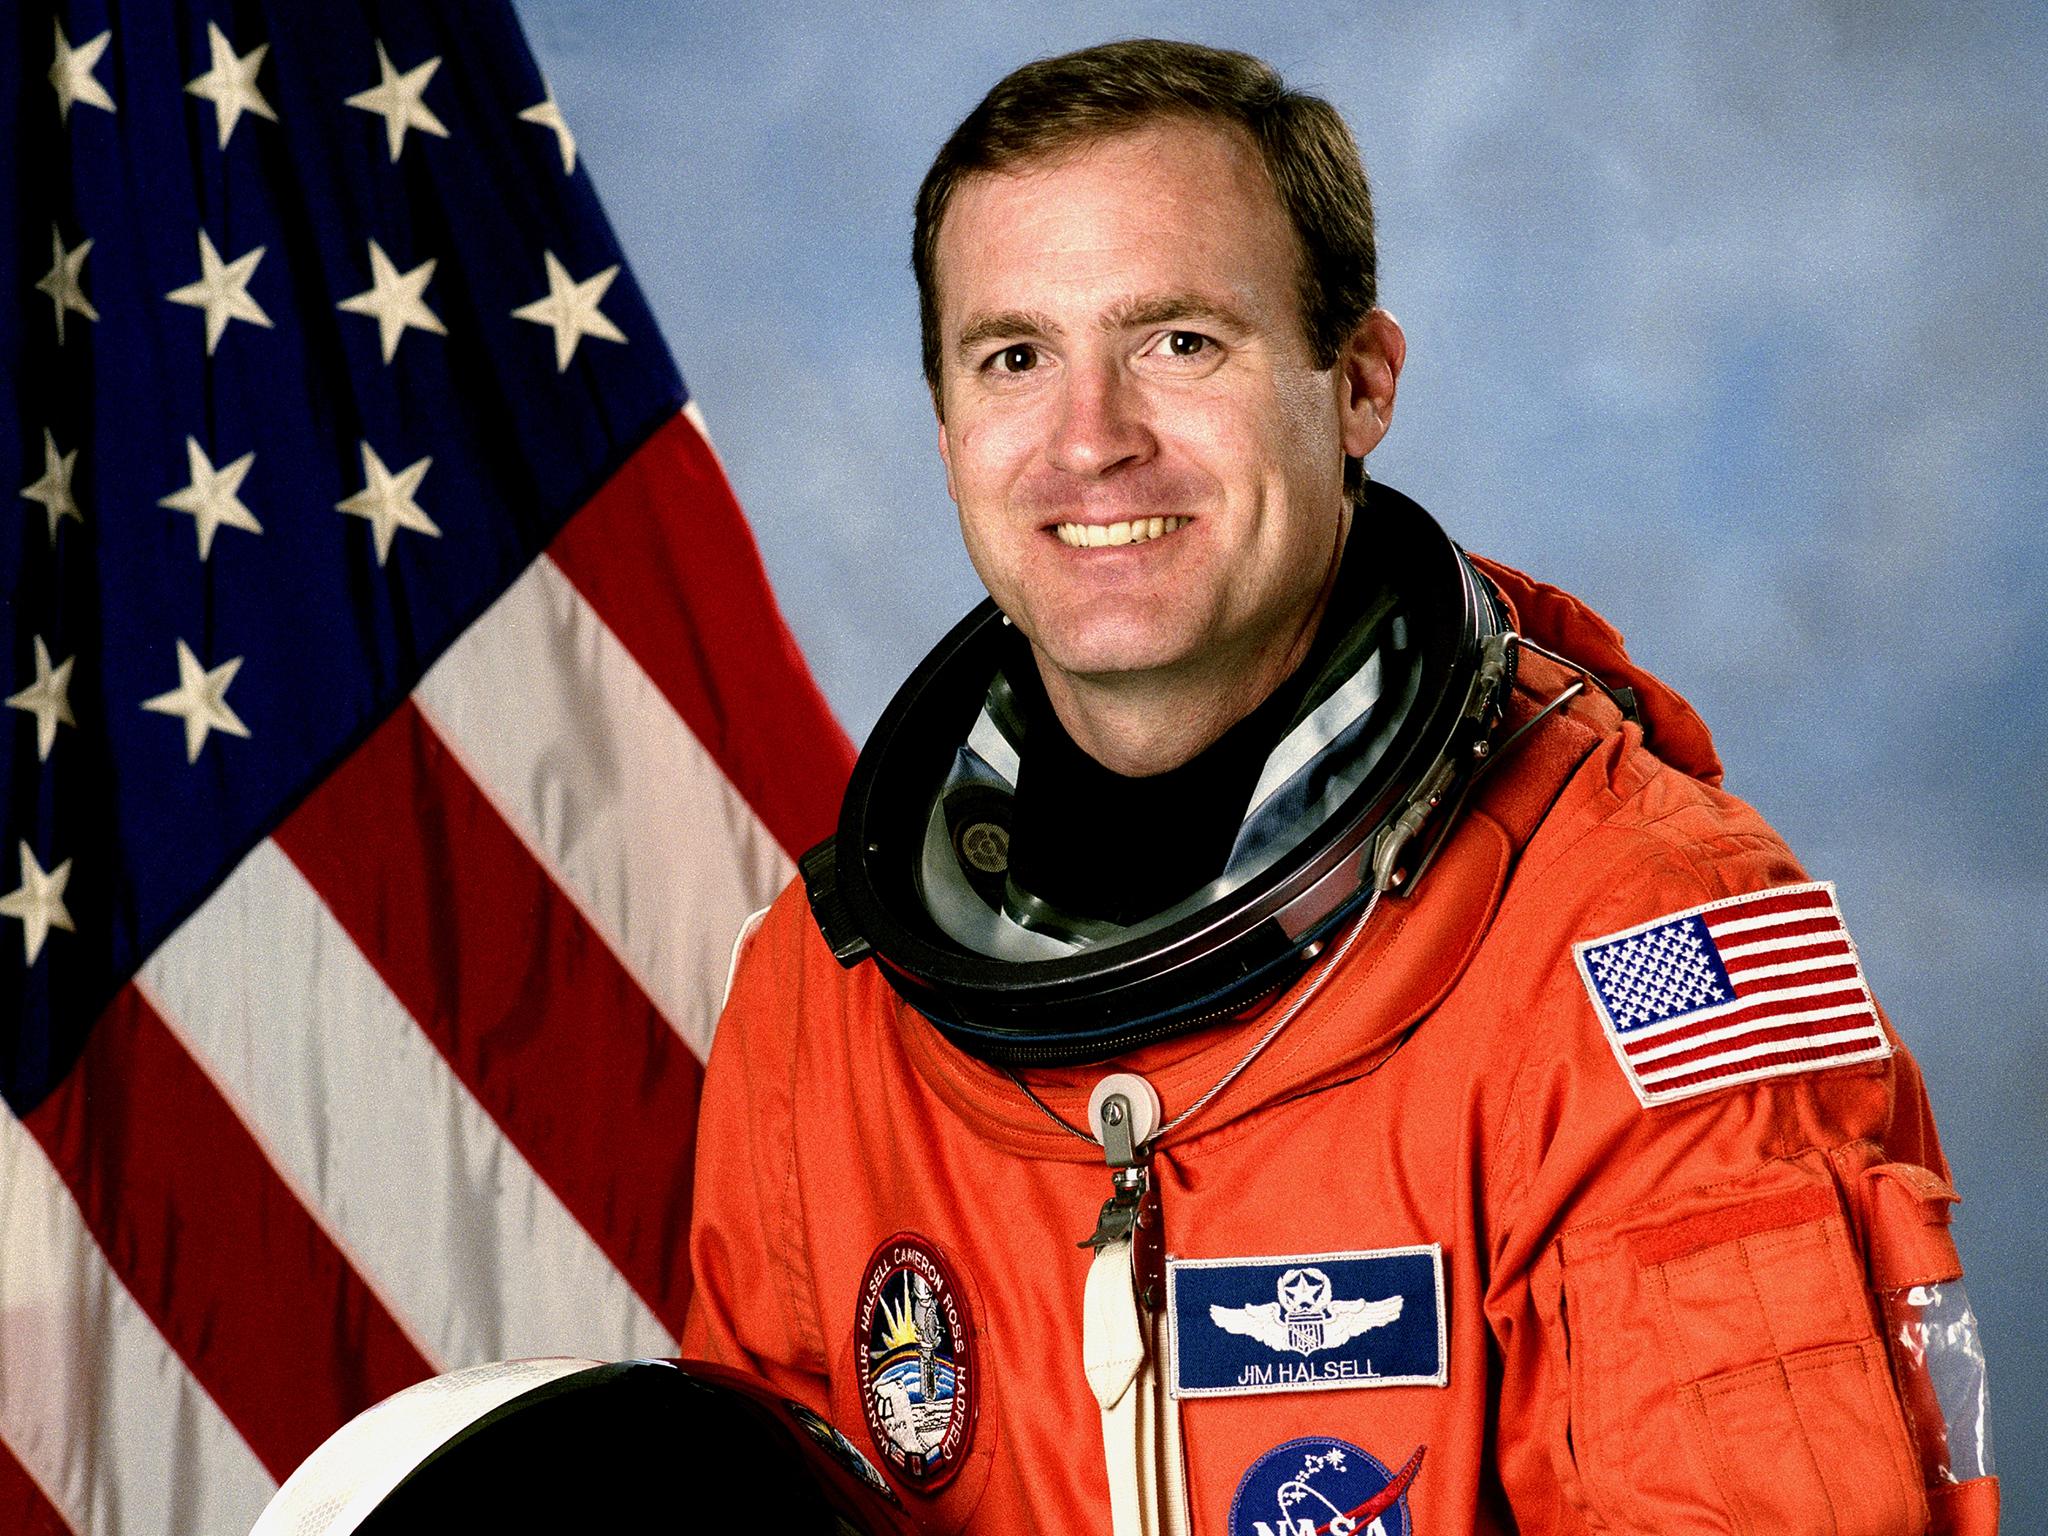 Retired NASA astronaut charged with murder in fatal crash argues alcohol was not involved